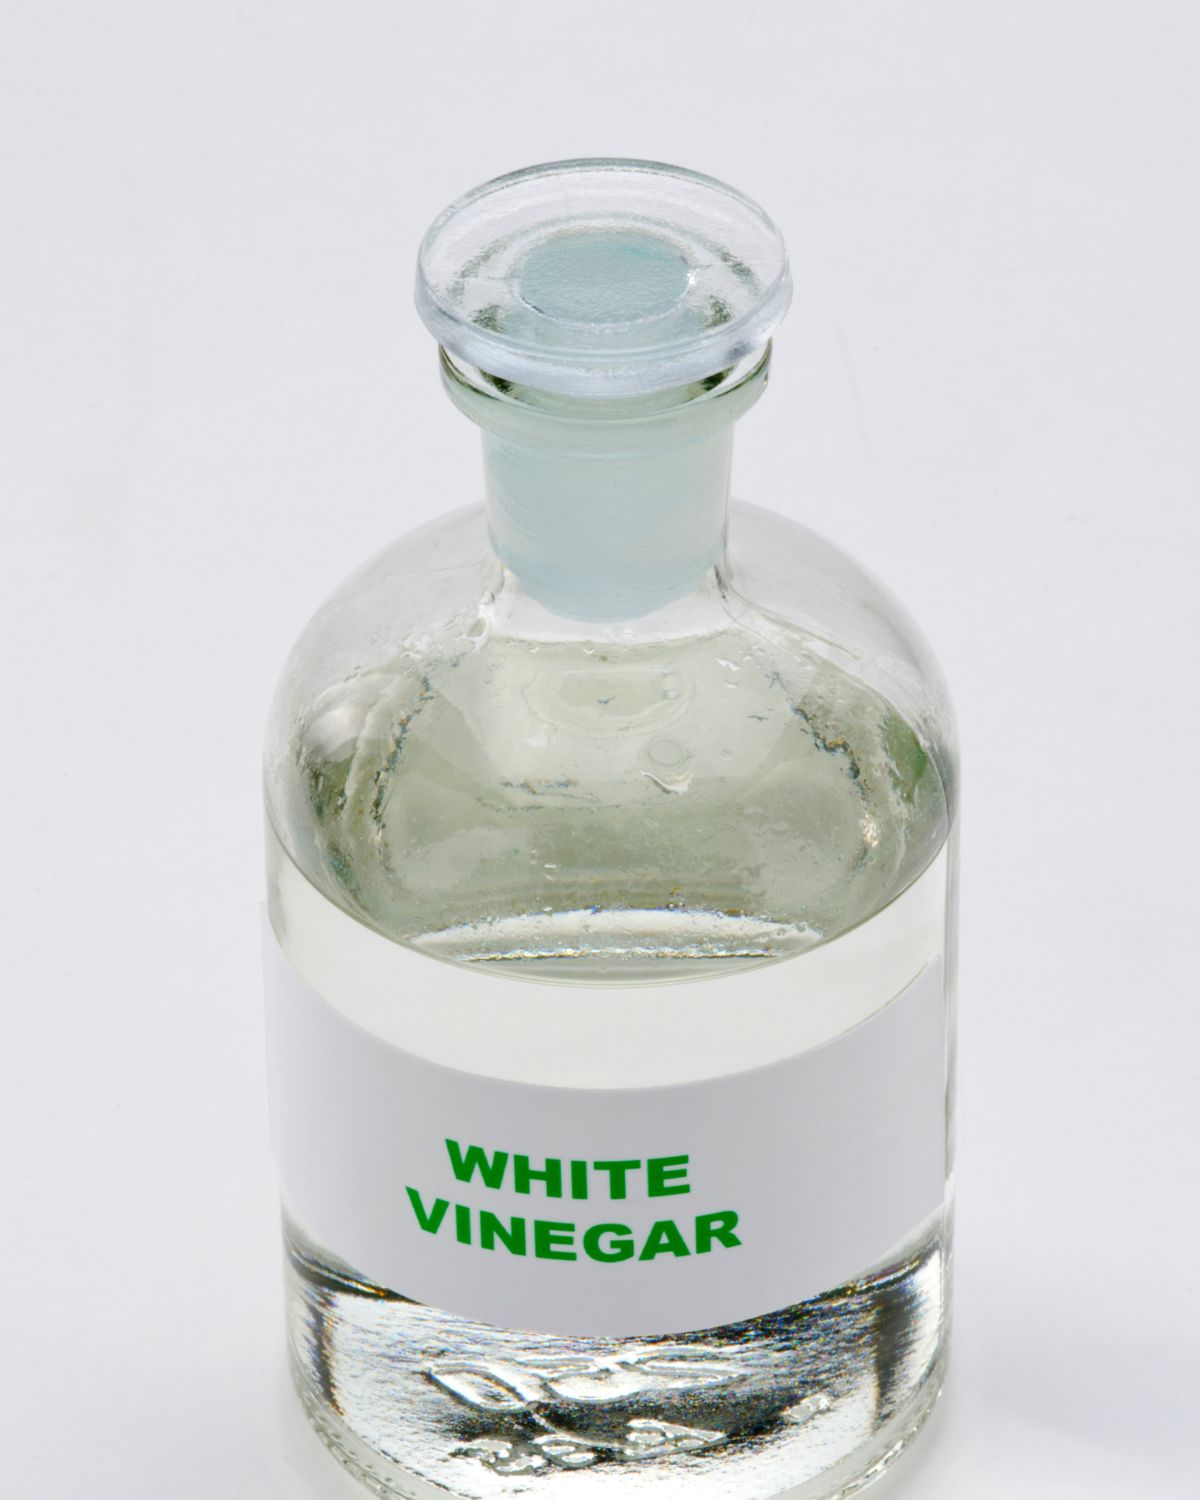 Vinegar for cleaning the coffee maker.